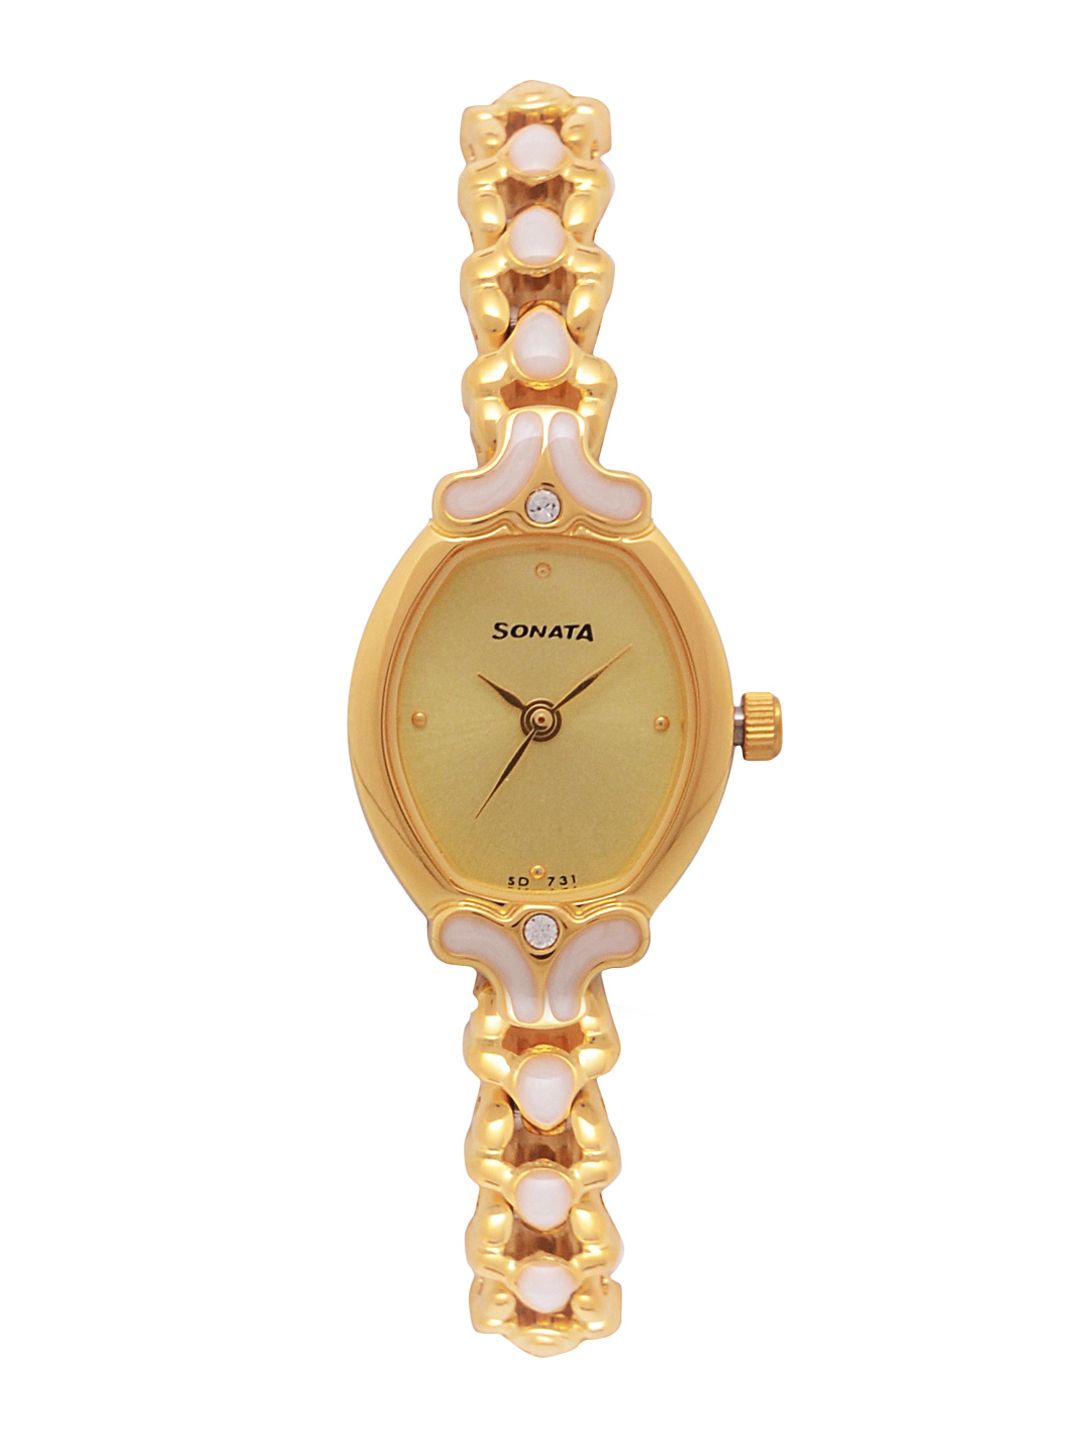 Sonata Women Gold-Toned Analogue Watch NK8068YM02 Price in India